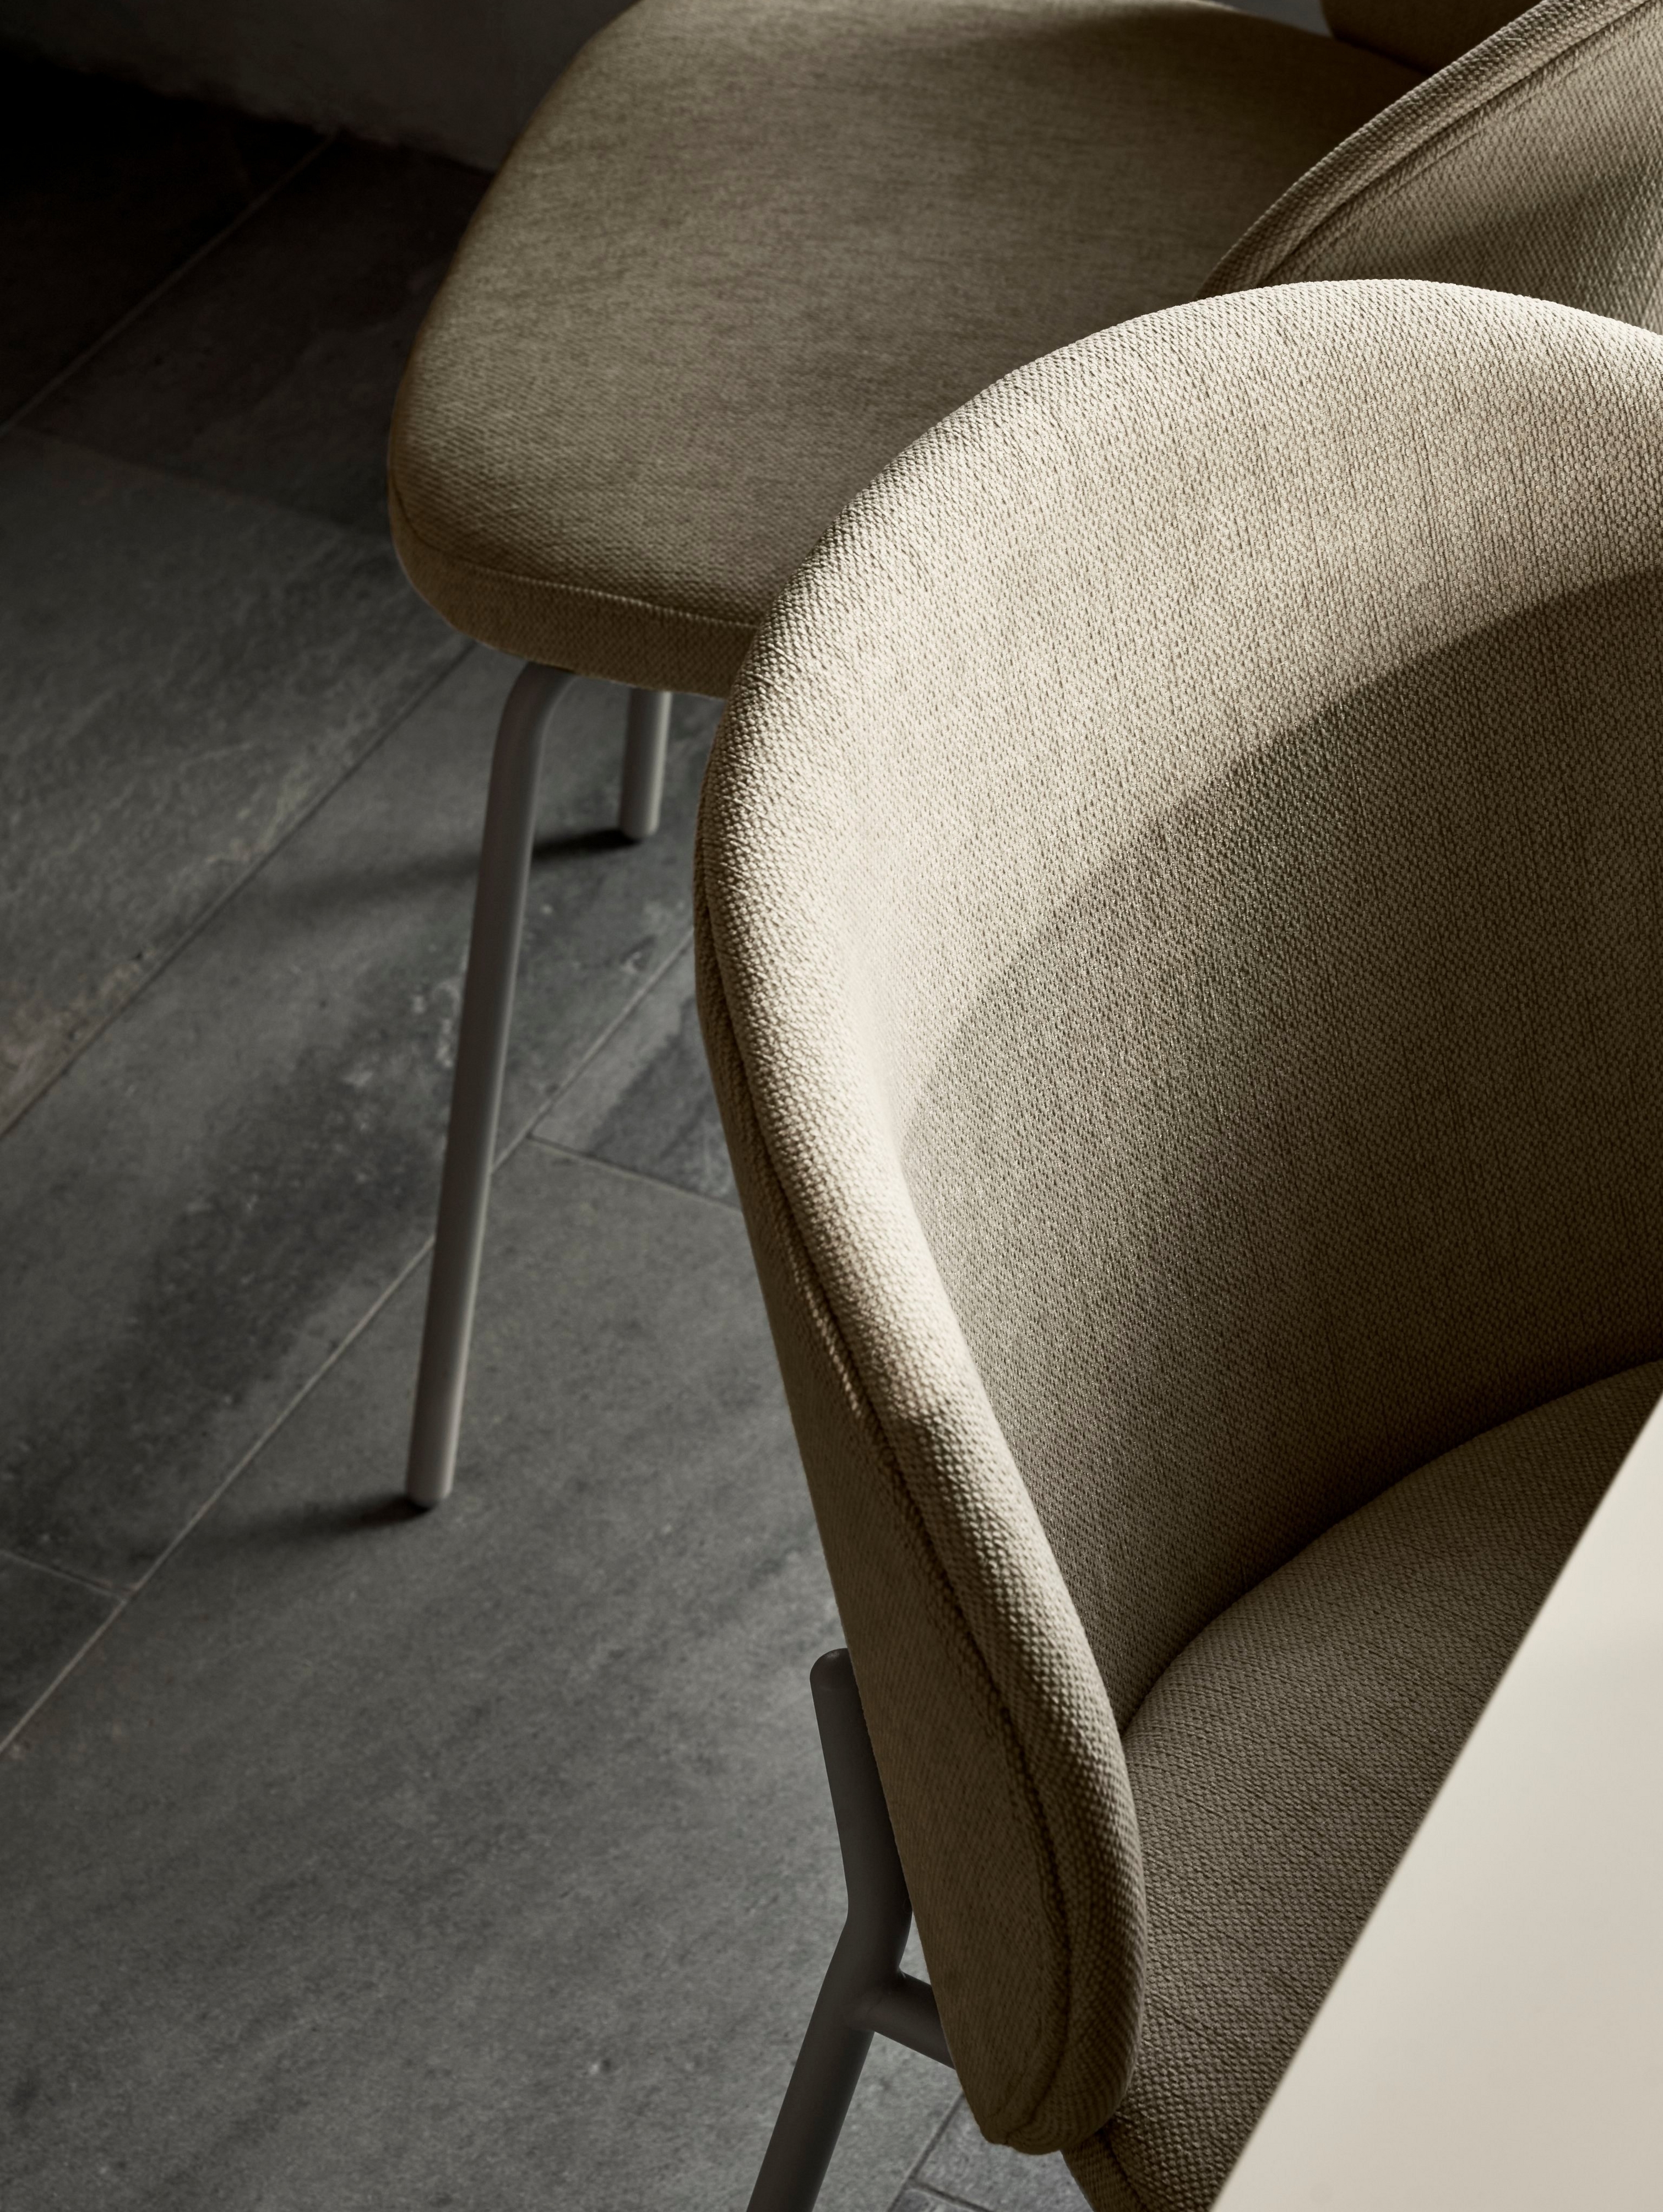 A up-close look at the Princeton dining chair in green Bresso fabric.